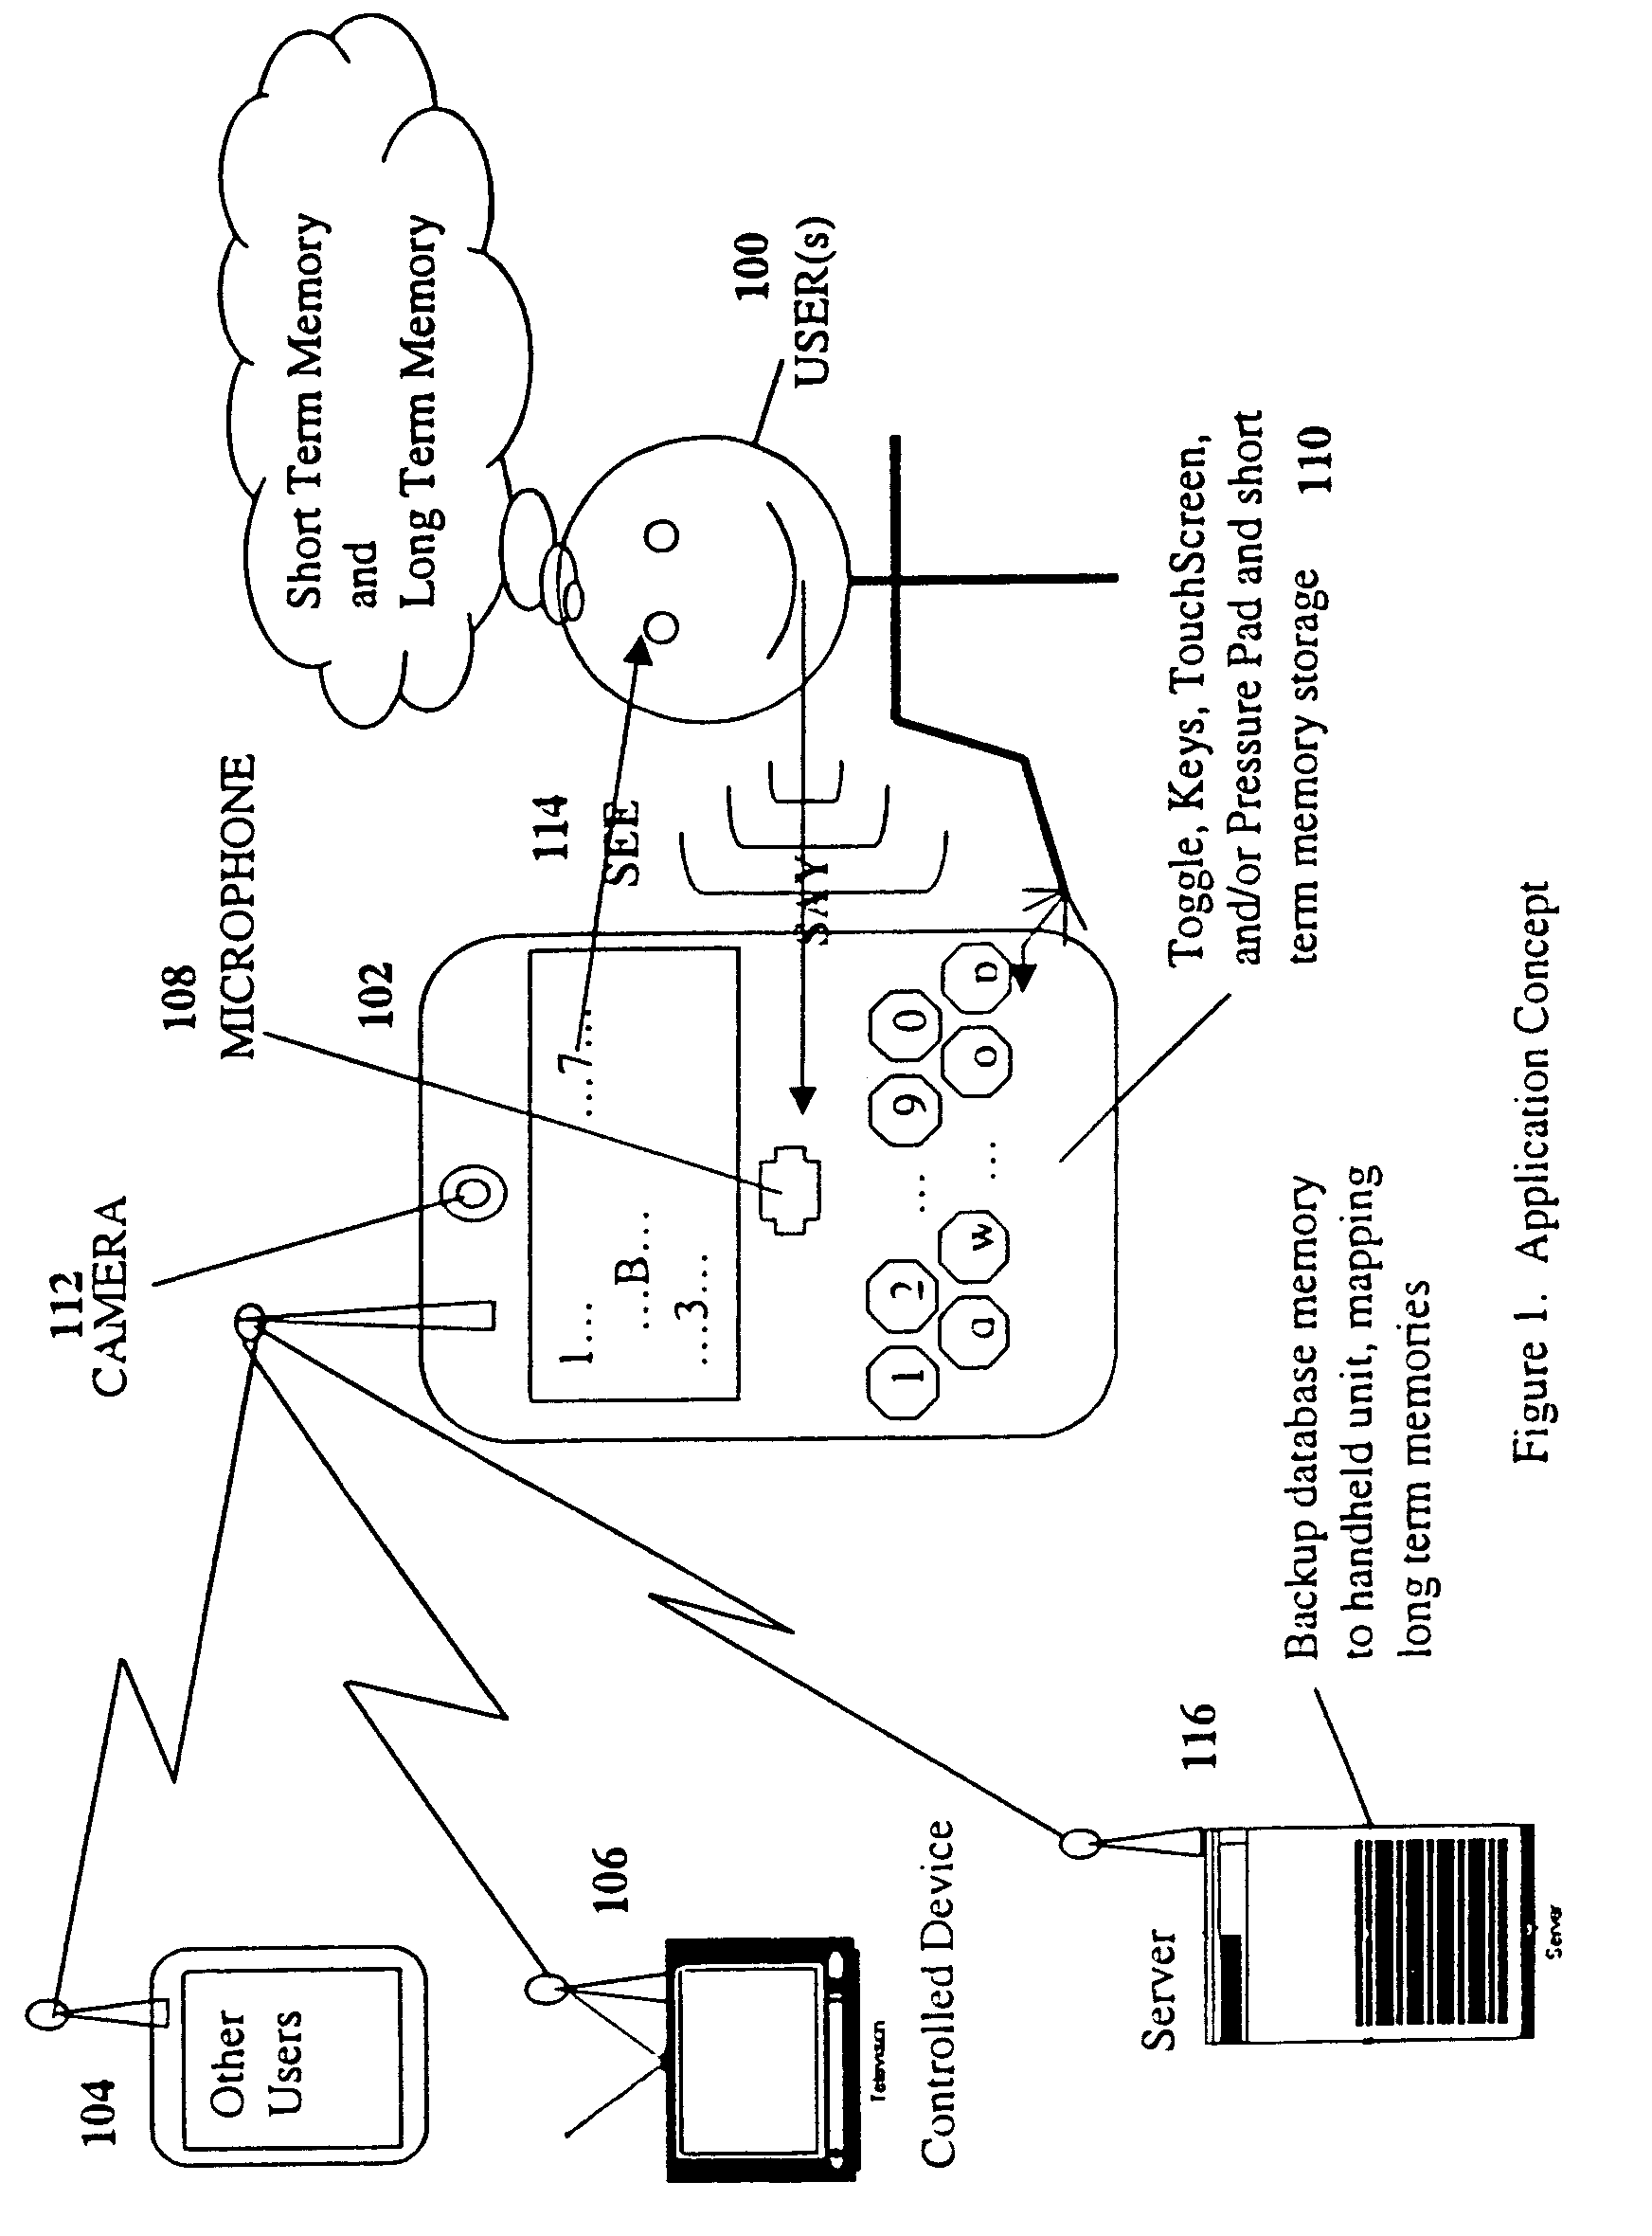 System and method for dynamic knowledge construction